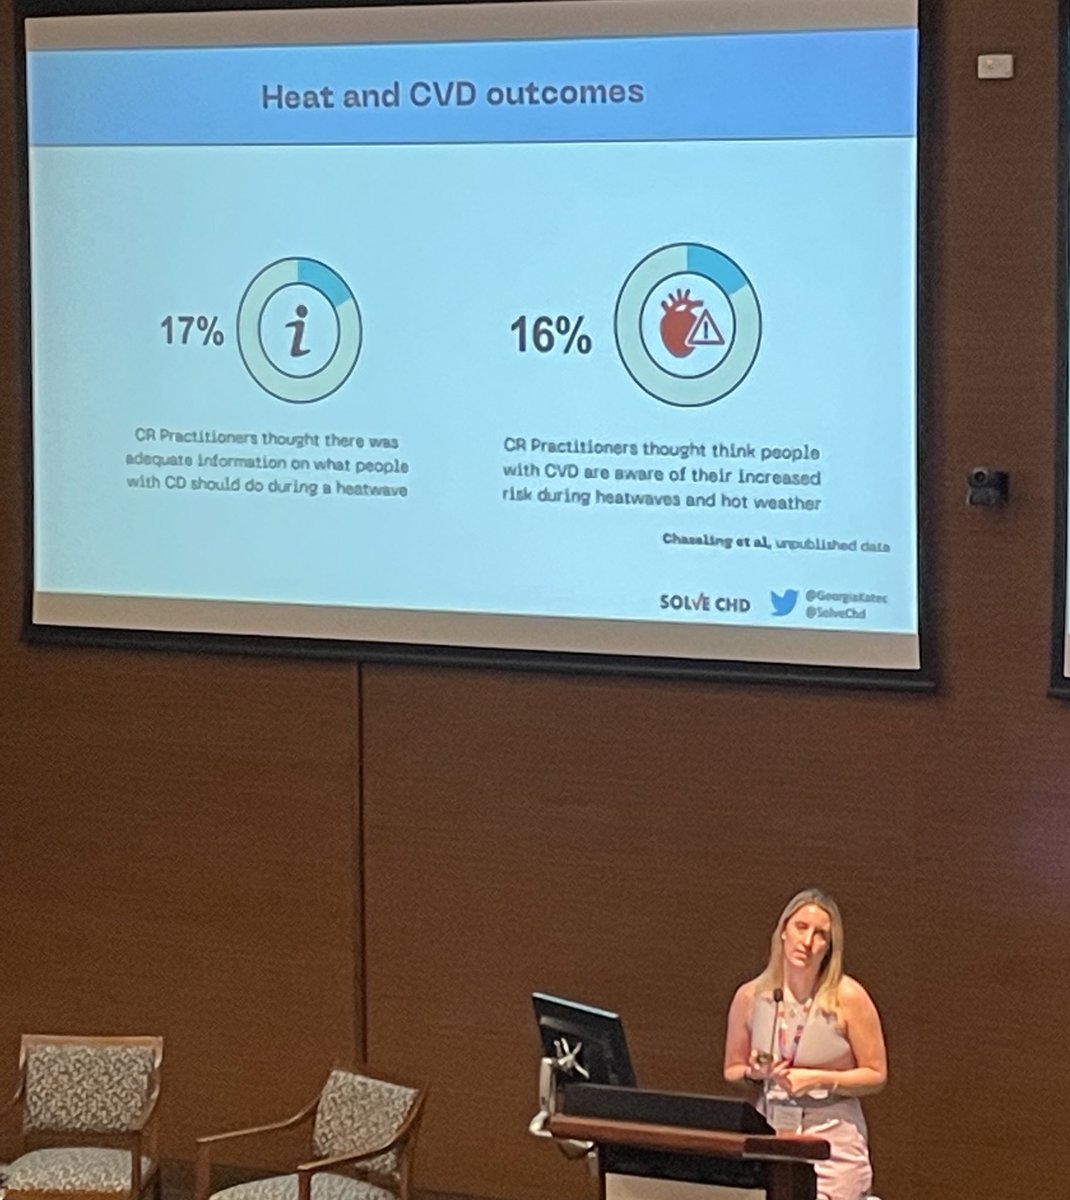 Climate health and CVD ☀️❤️@GeorgiaKatec presenting some results from our CR survey during her plenary session at @ACRAASM @SolveChd